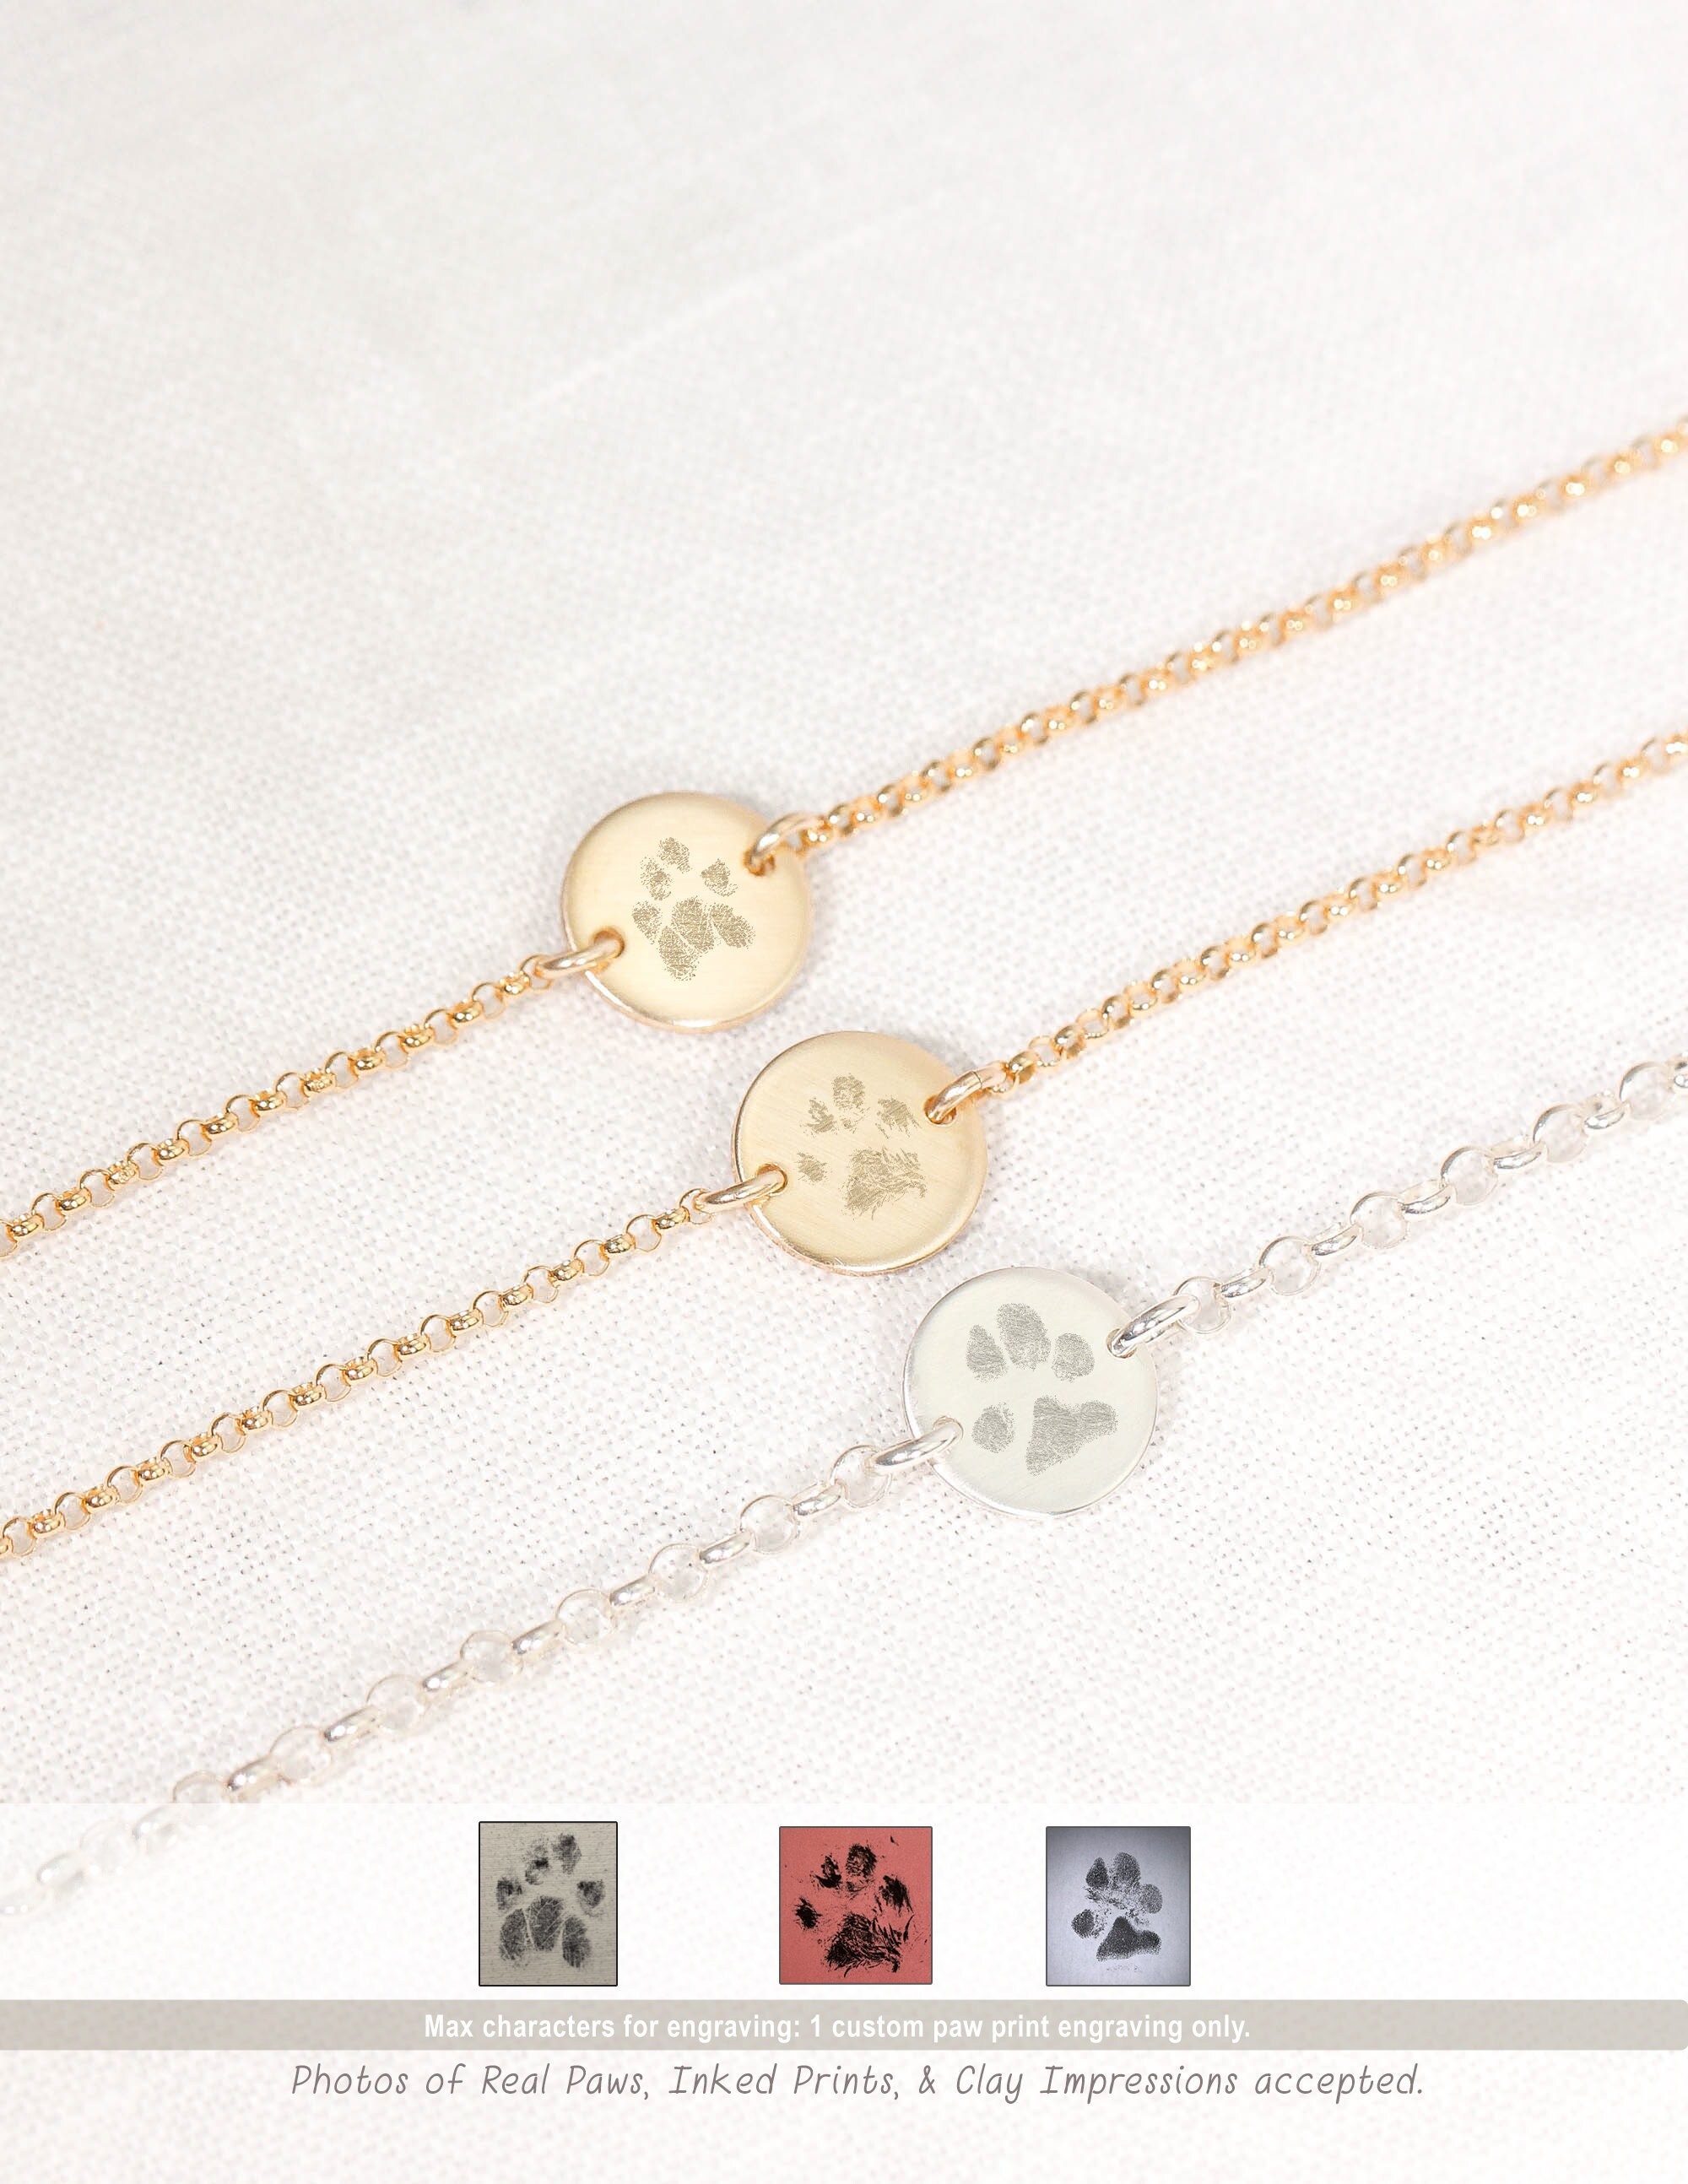 Custom Dog Paw Necklace - Paw Print Necklace | Sincerely Silver